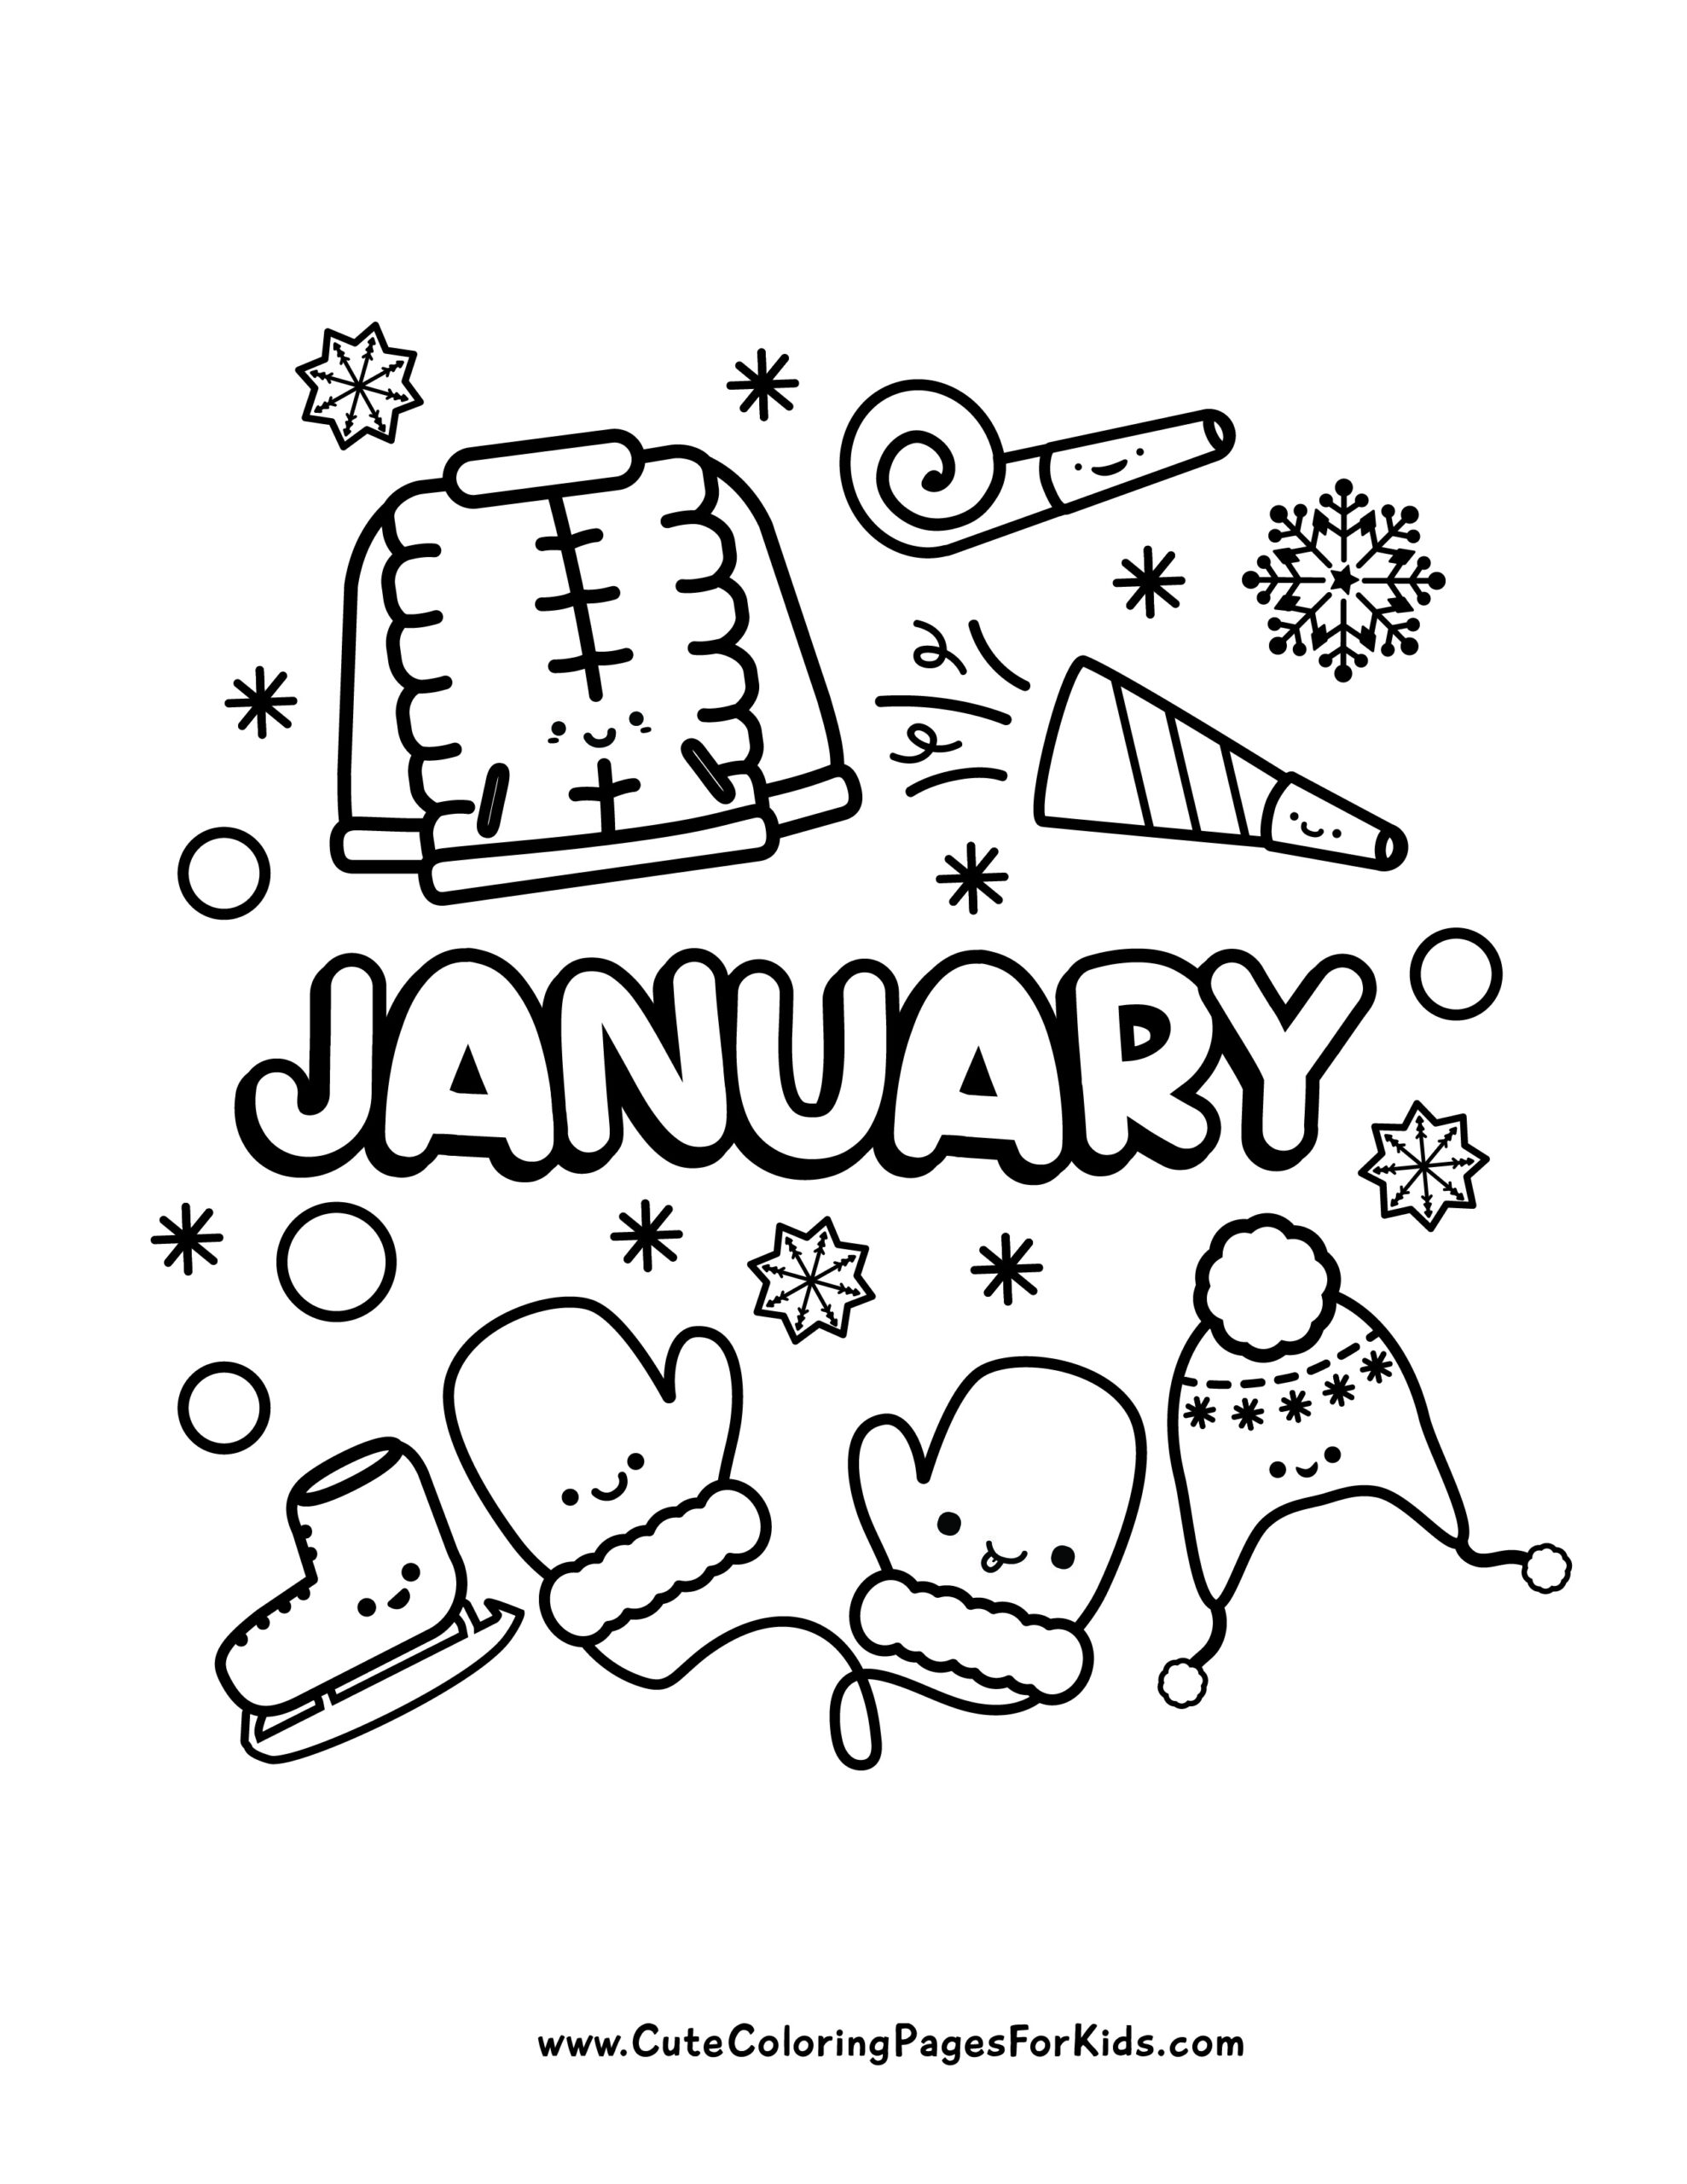 January Coloring Pages - Cute Coloring Pages For Kids